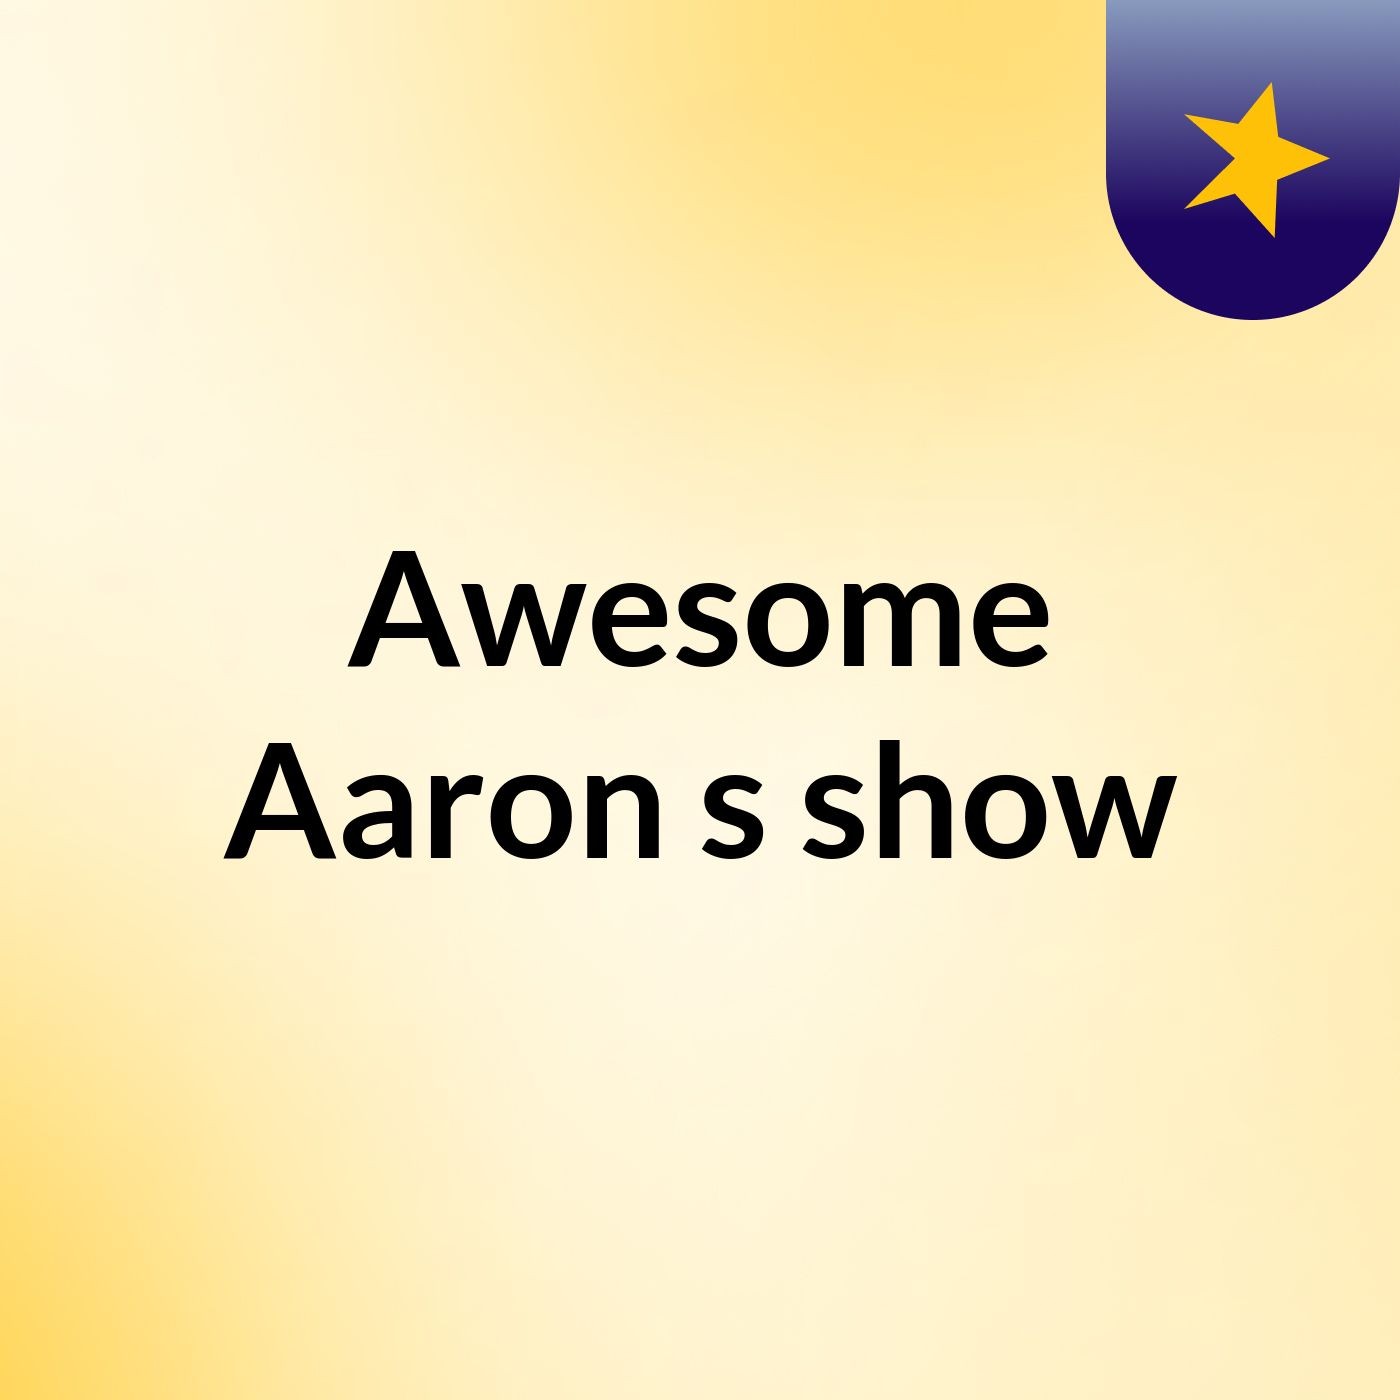 Awesome Aaron's show